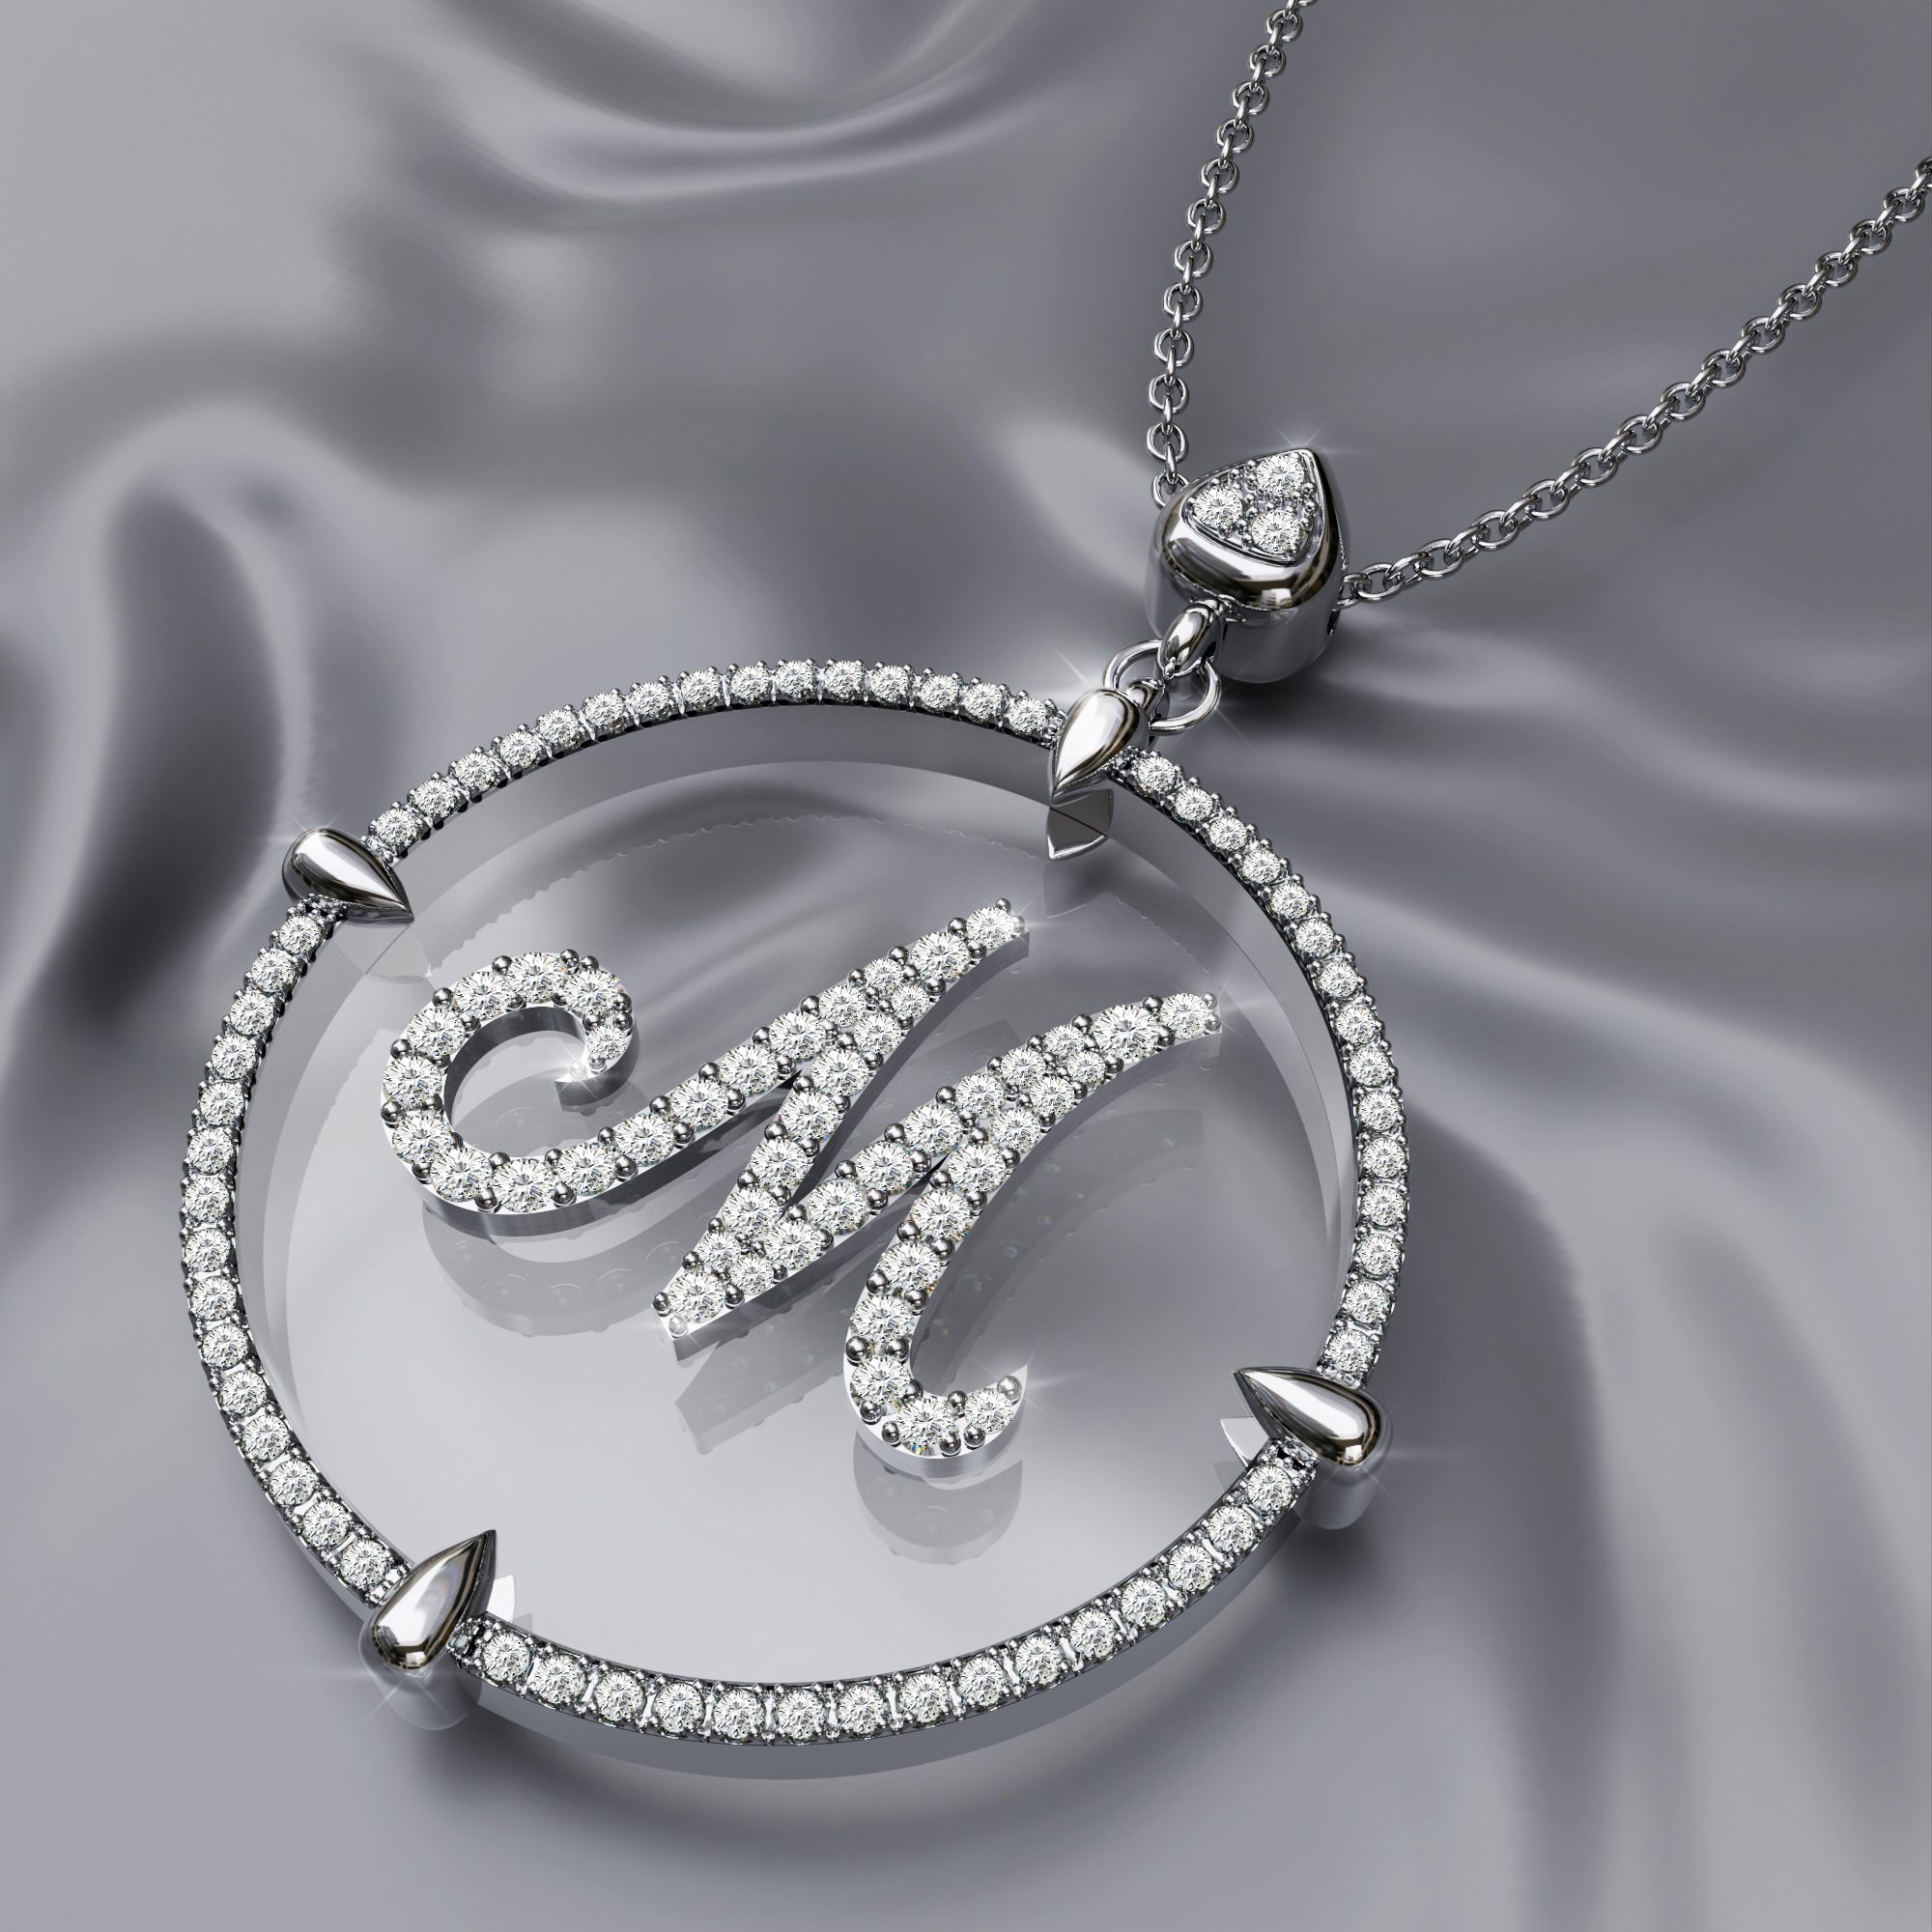 M Pavé Initial Silver Necklace | Astrid & Miyu Necklaces